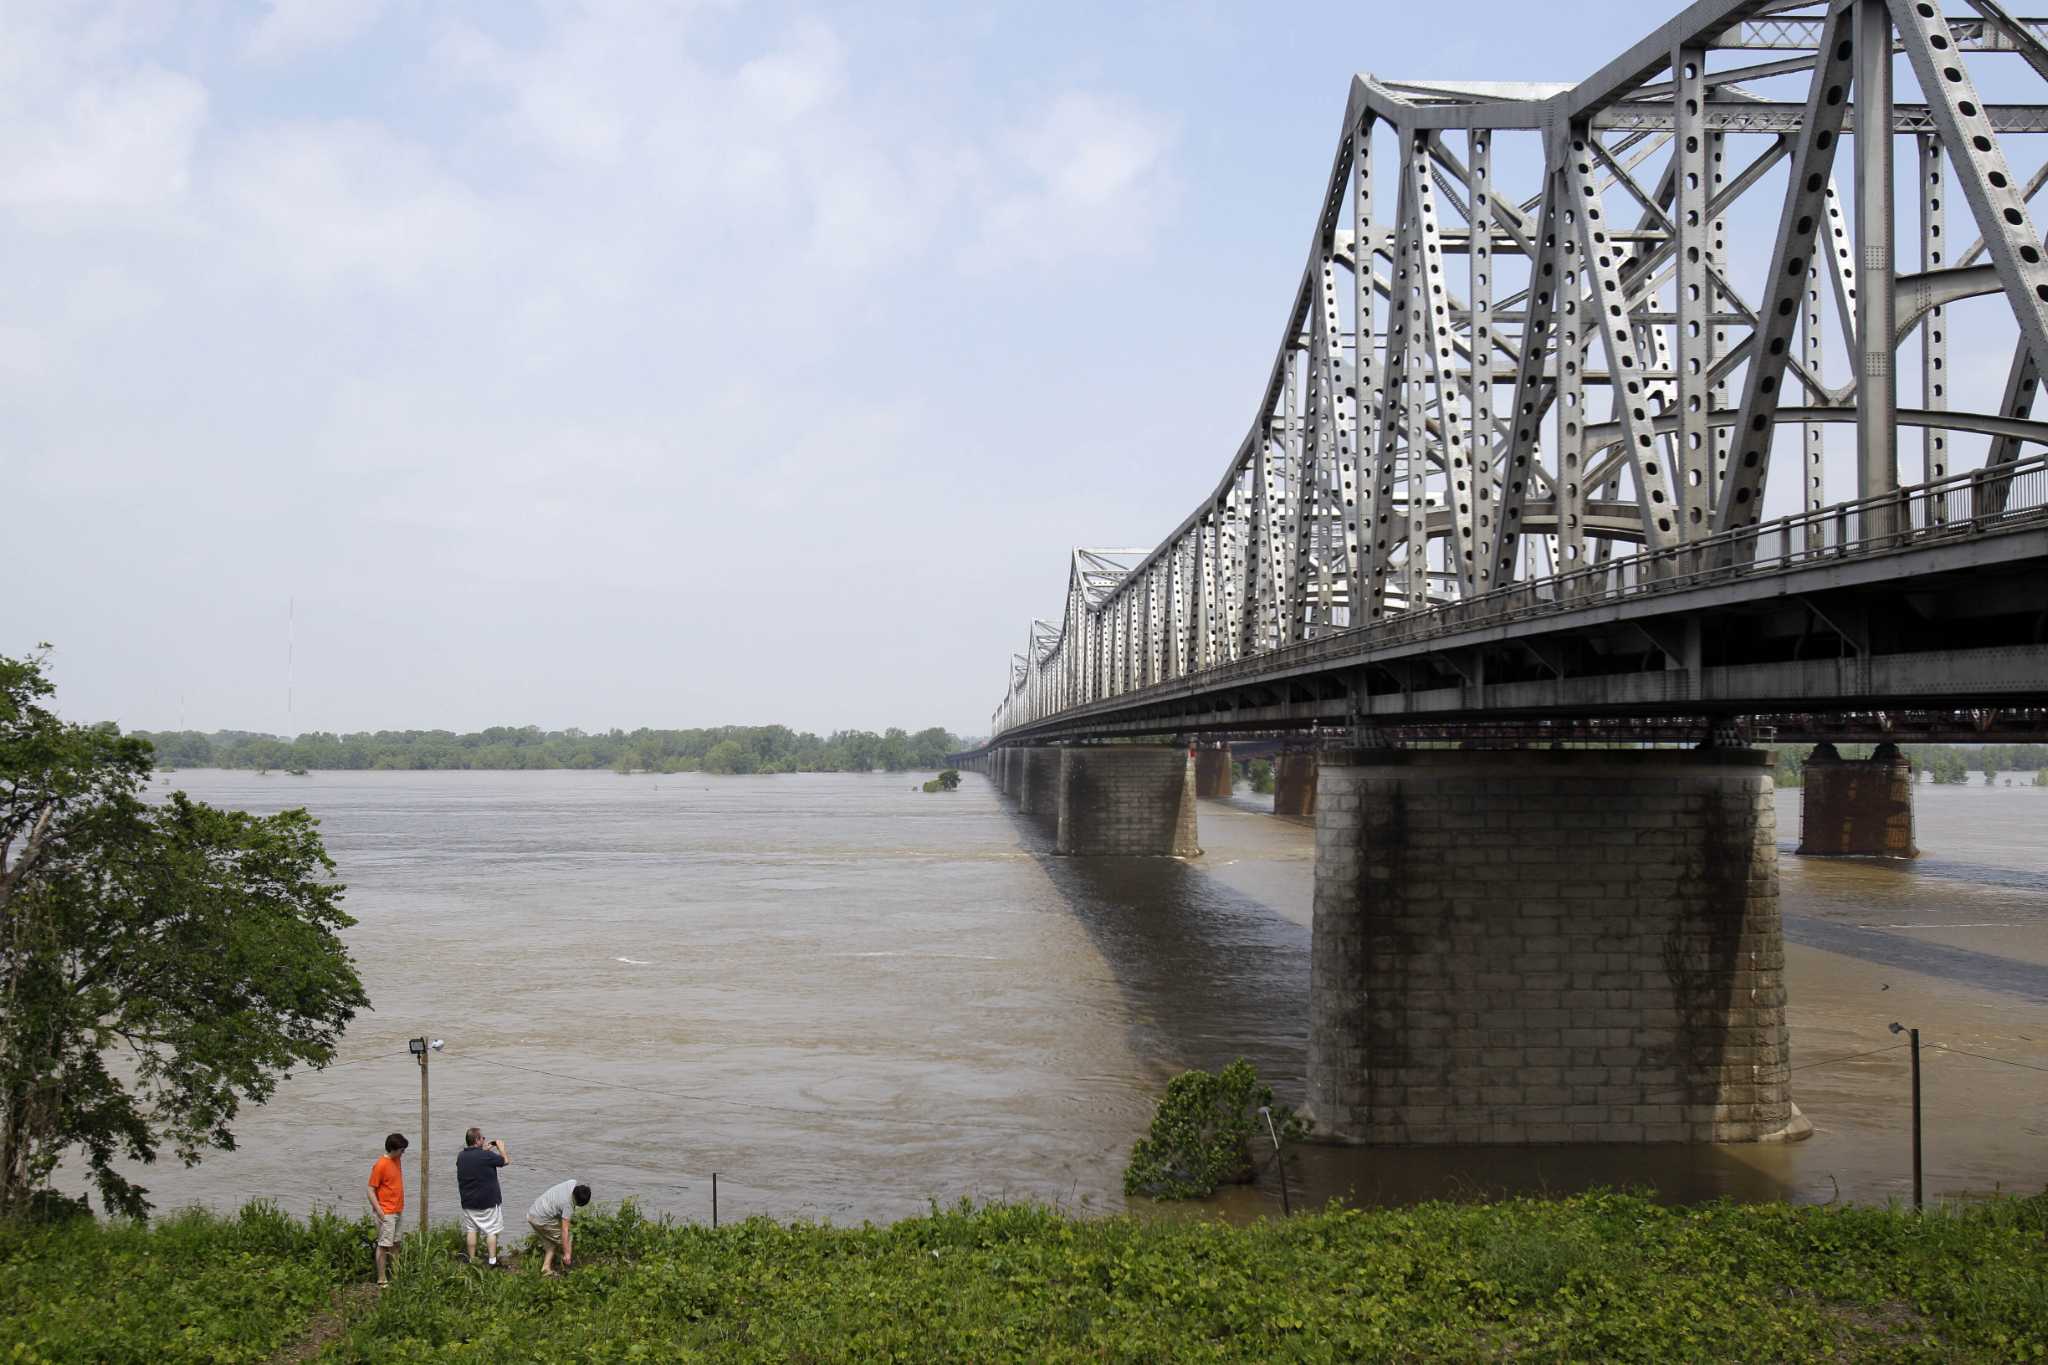 US Transportation Department to invest nearly $400 million for new Interstate 55 bridge in Memphis